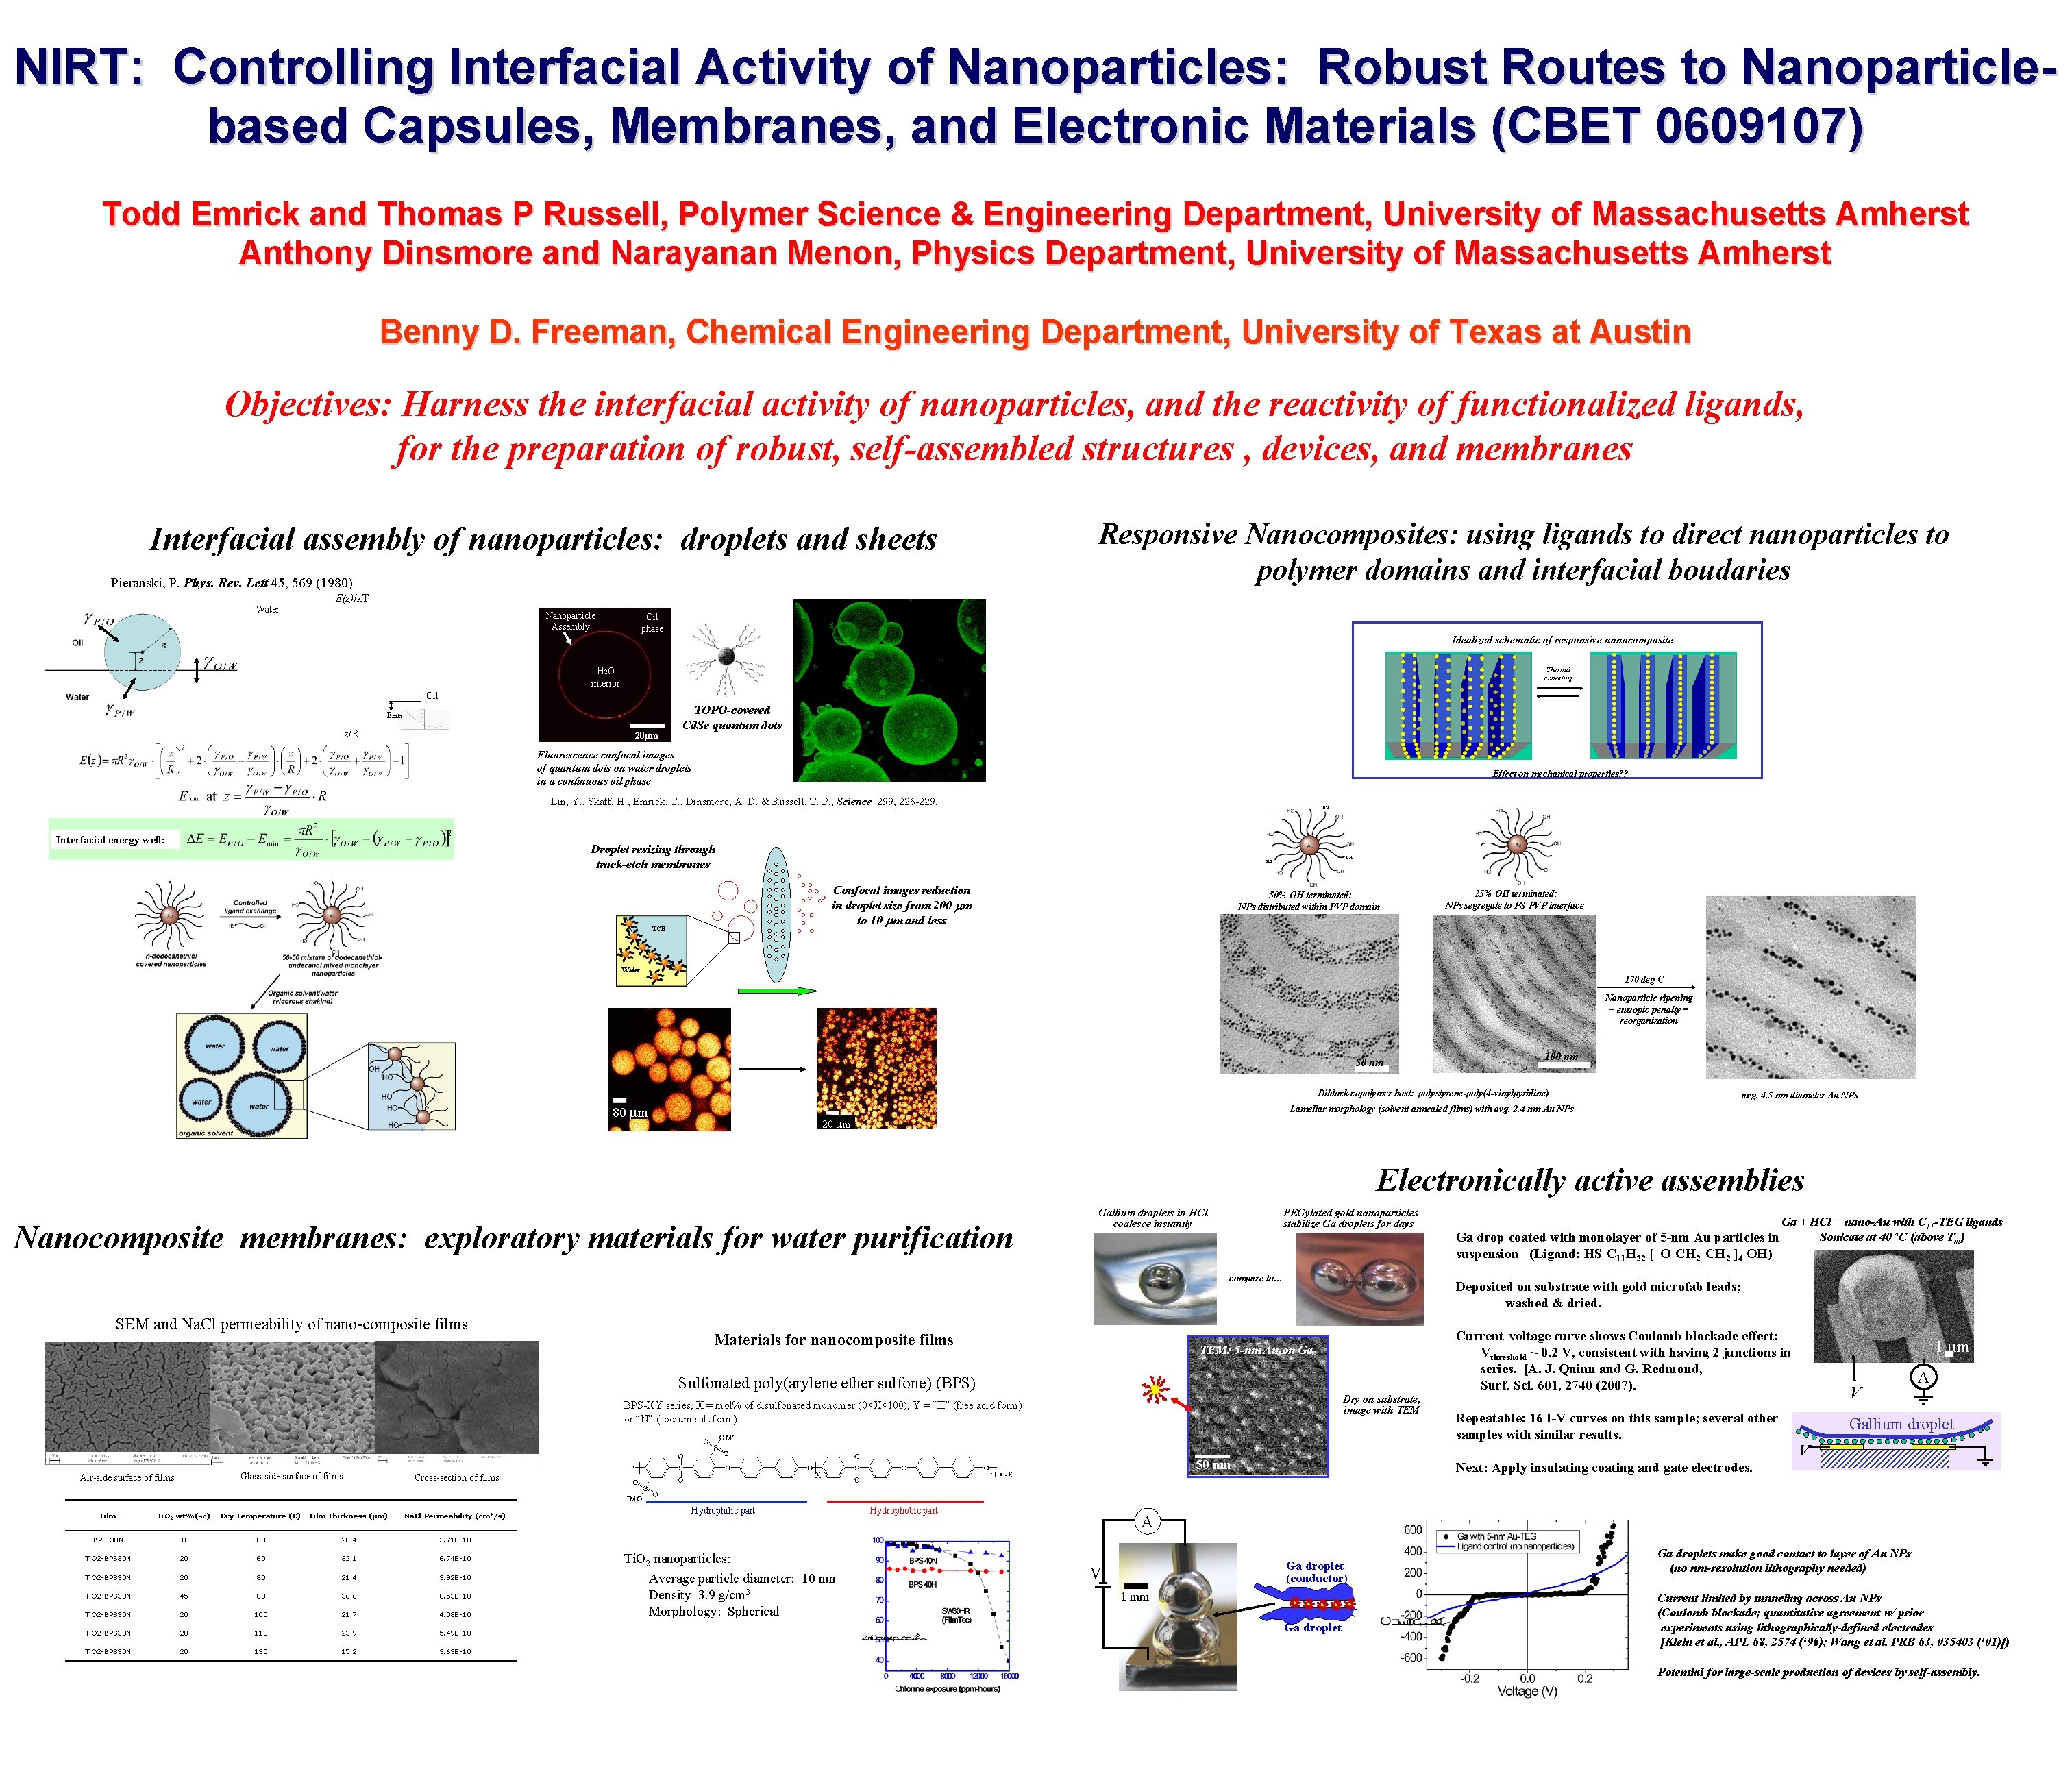 NIRT: Controlling Interfacial Activity of Nanoparticles: Robust Routes to Nanoparticlebased Capsules, Membranes, and Electronic